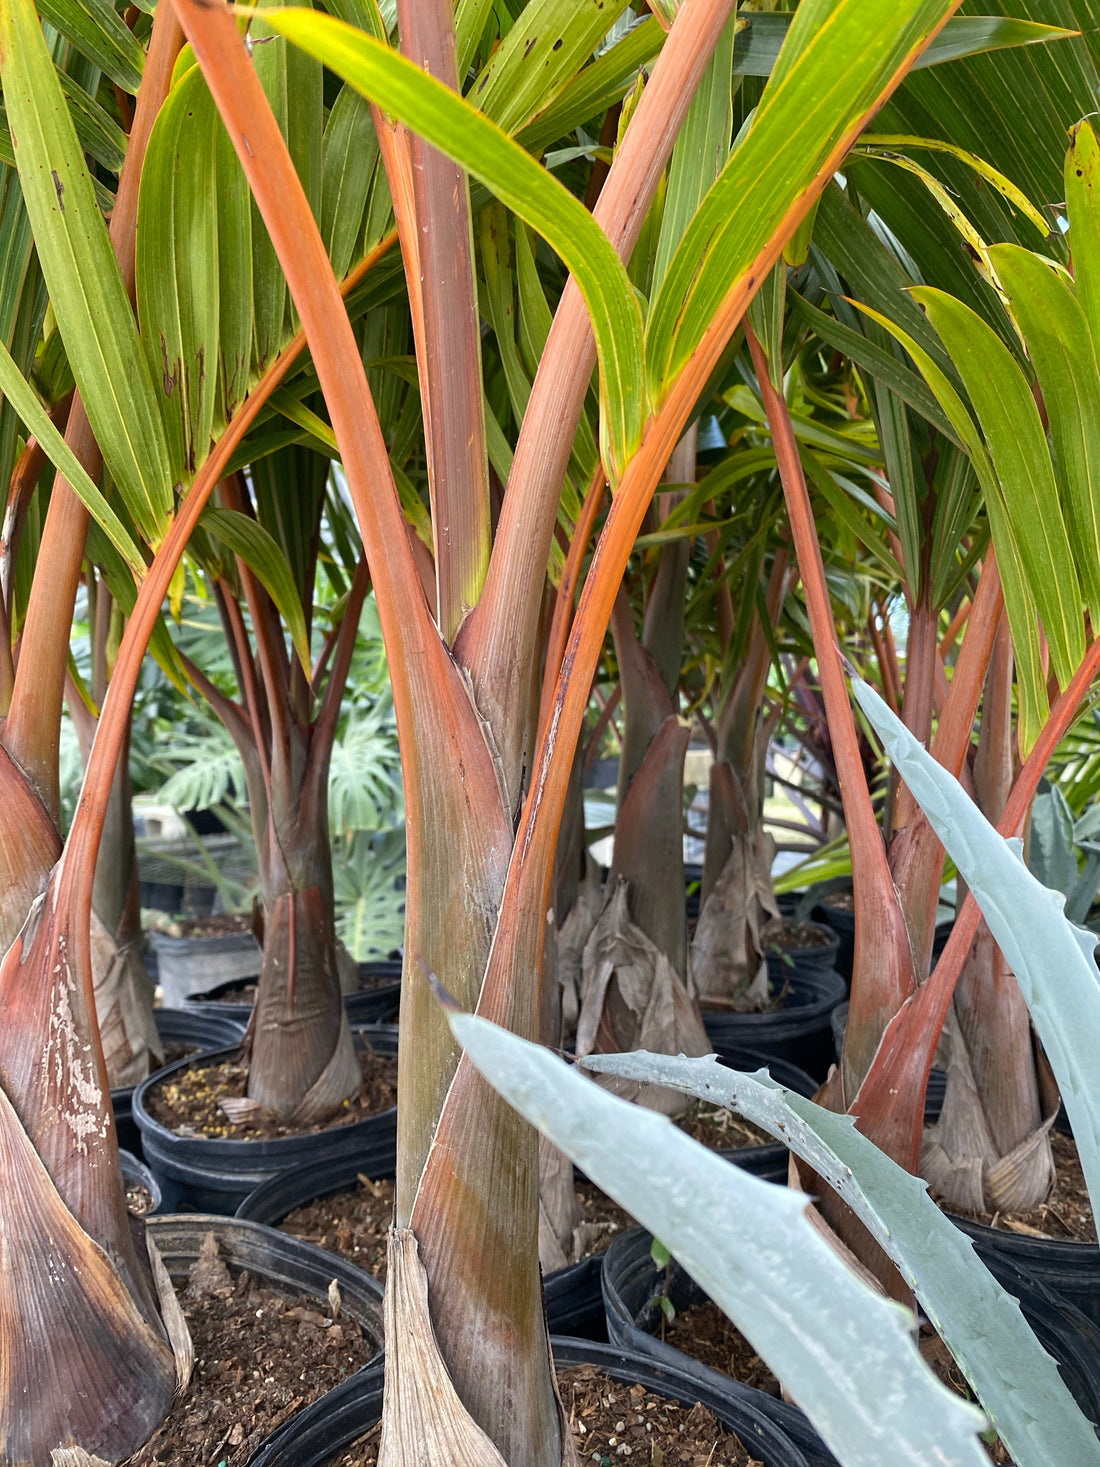 Triangle Palm, Dypsis Decaryi